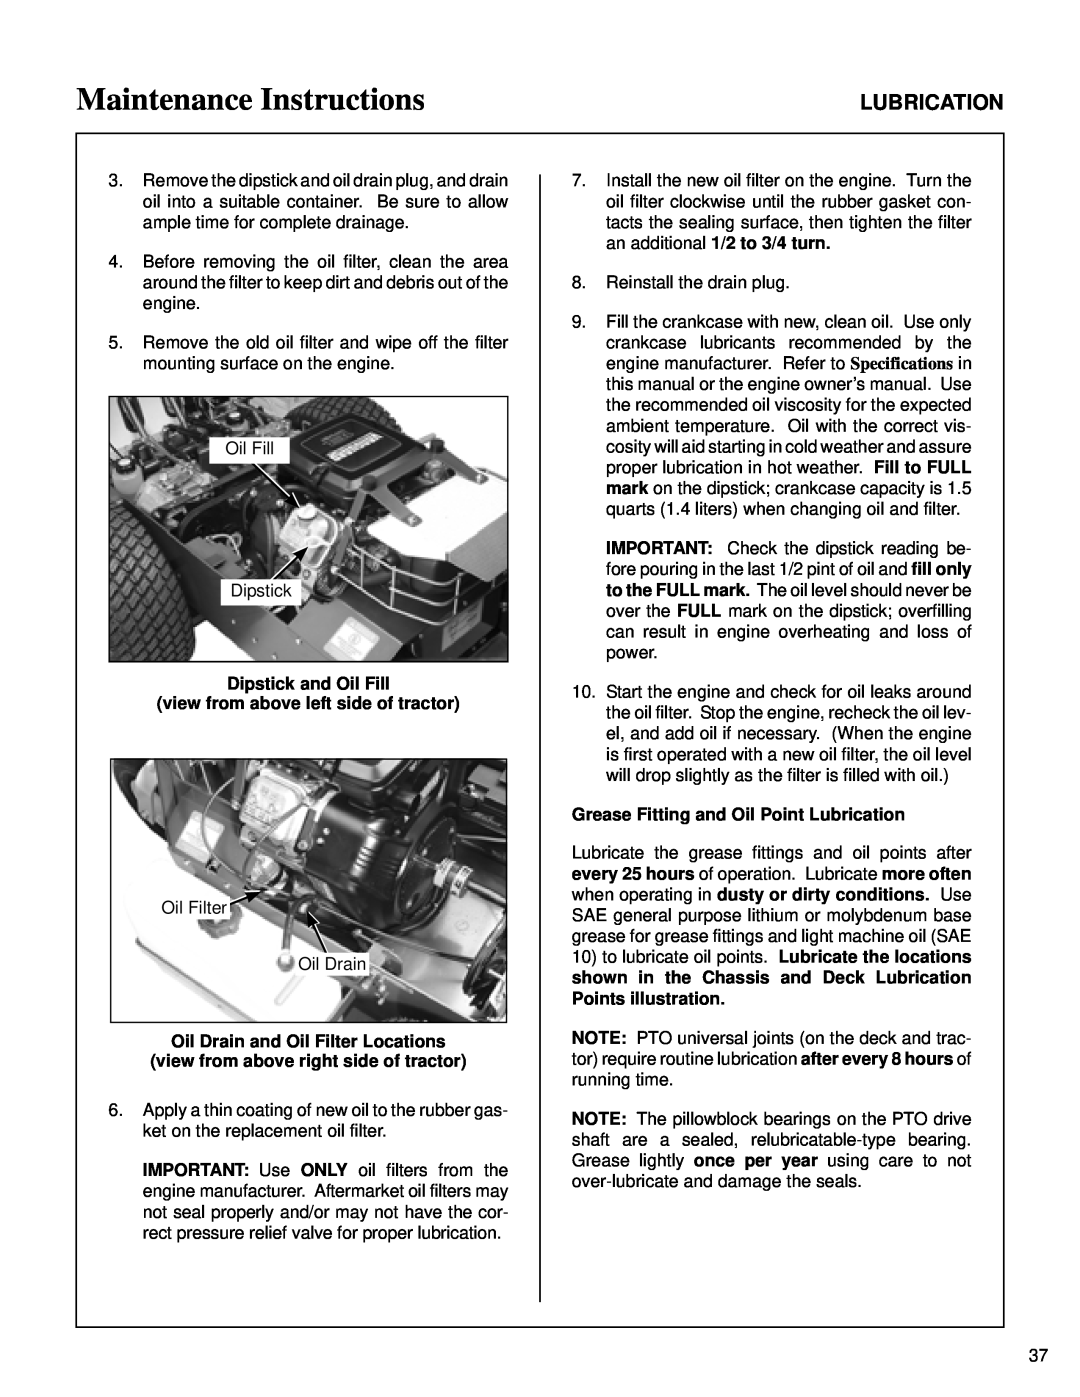 Briggs & Stratton MB (18 HP) owner manual Maintenance Instructions, Lubrication, Oil Drain and Oil Filter Locations 